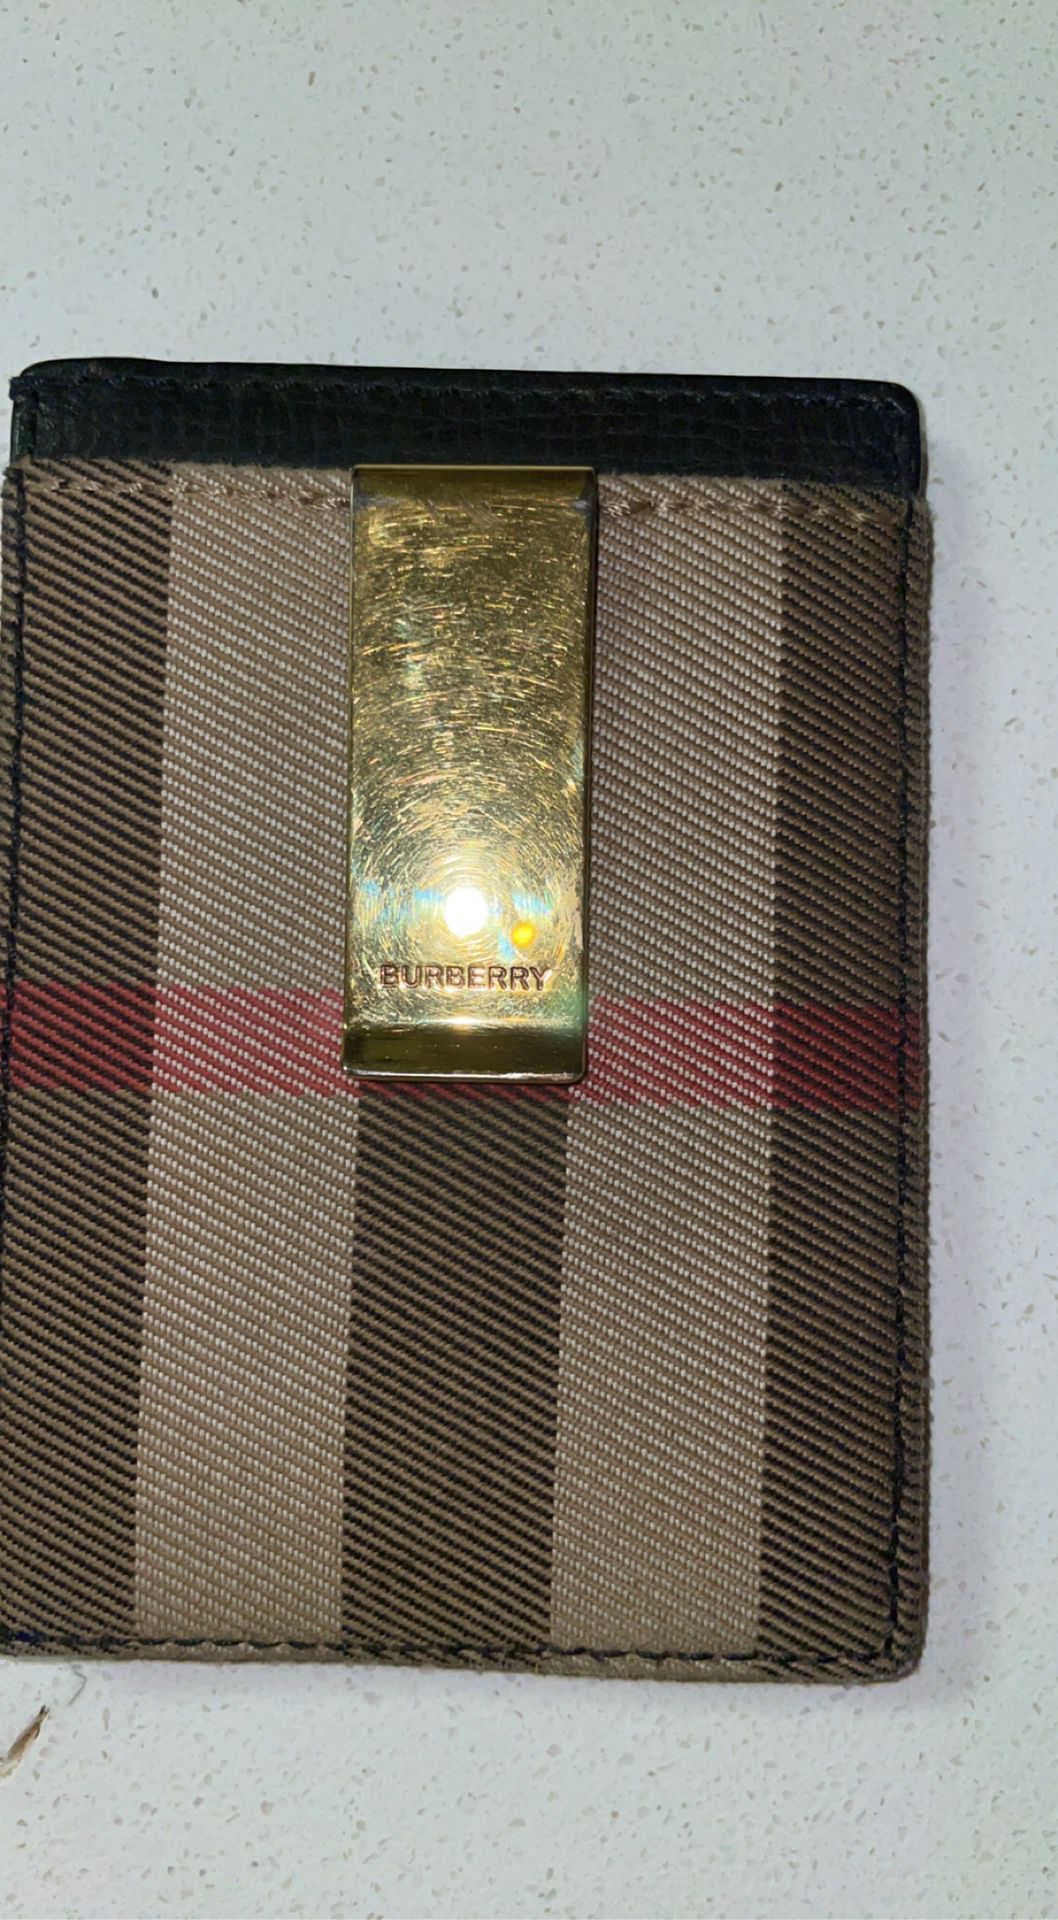 Men's Burberry Money Clip Wallet/ Authentic! Not FAKE! for Sale in Houston,  TX - OfferUp